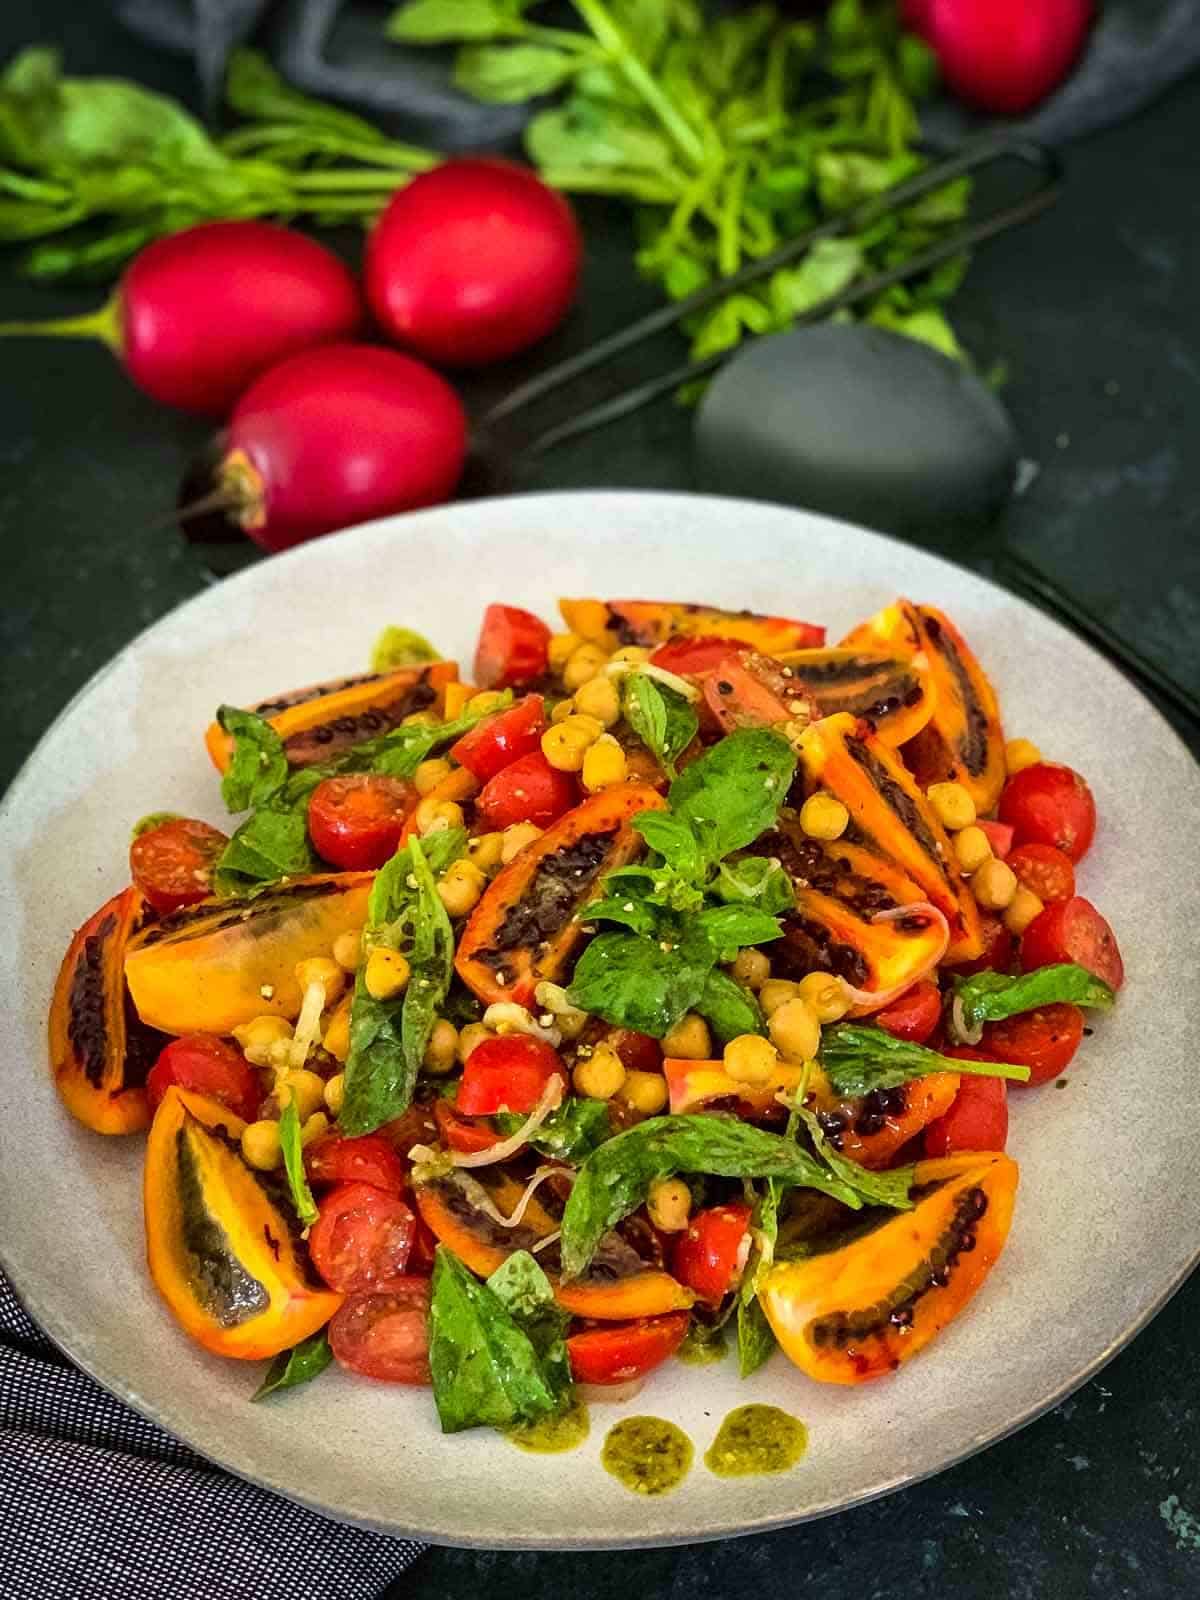 Red Tamarillo Salad with Basil on a white plate with whole red tamarillos on the side